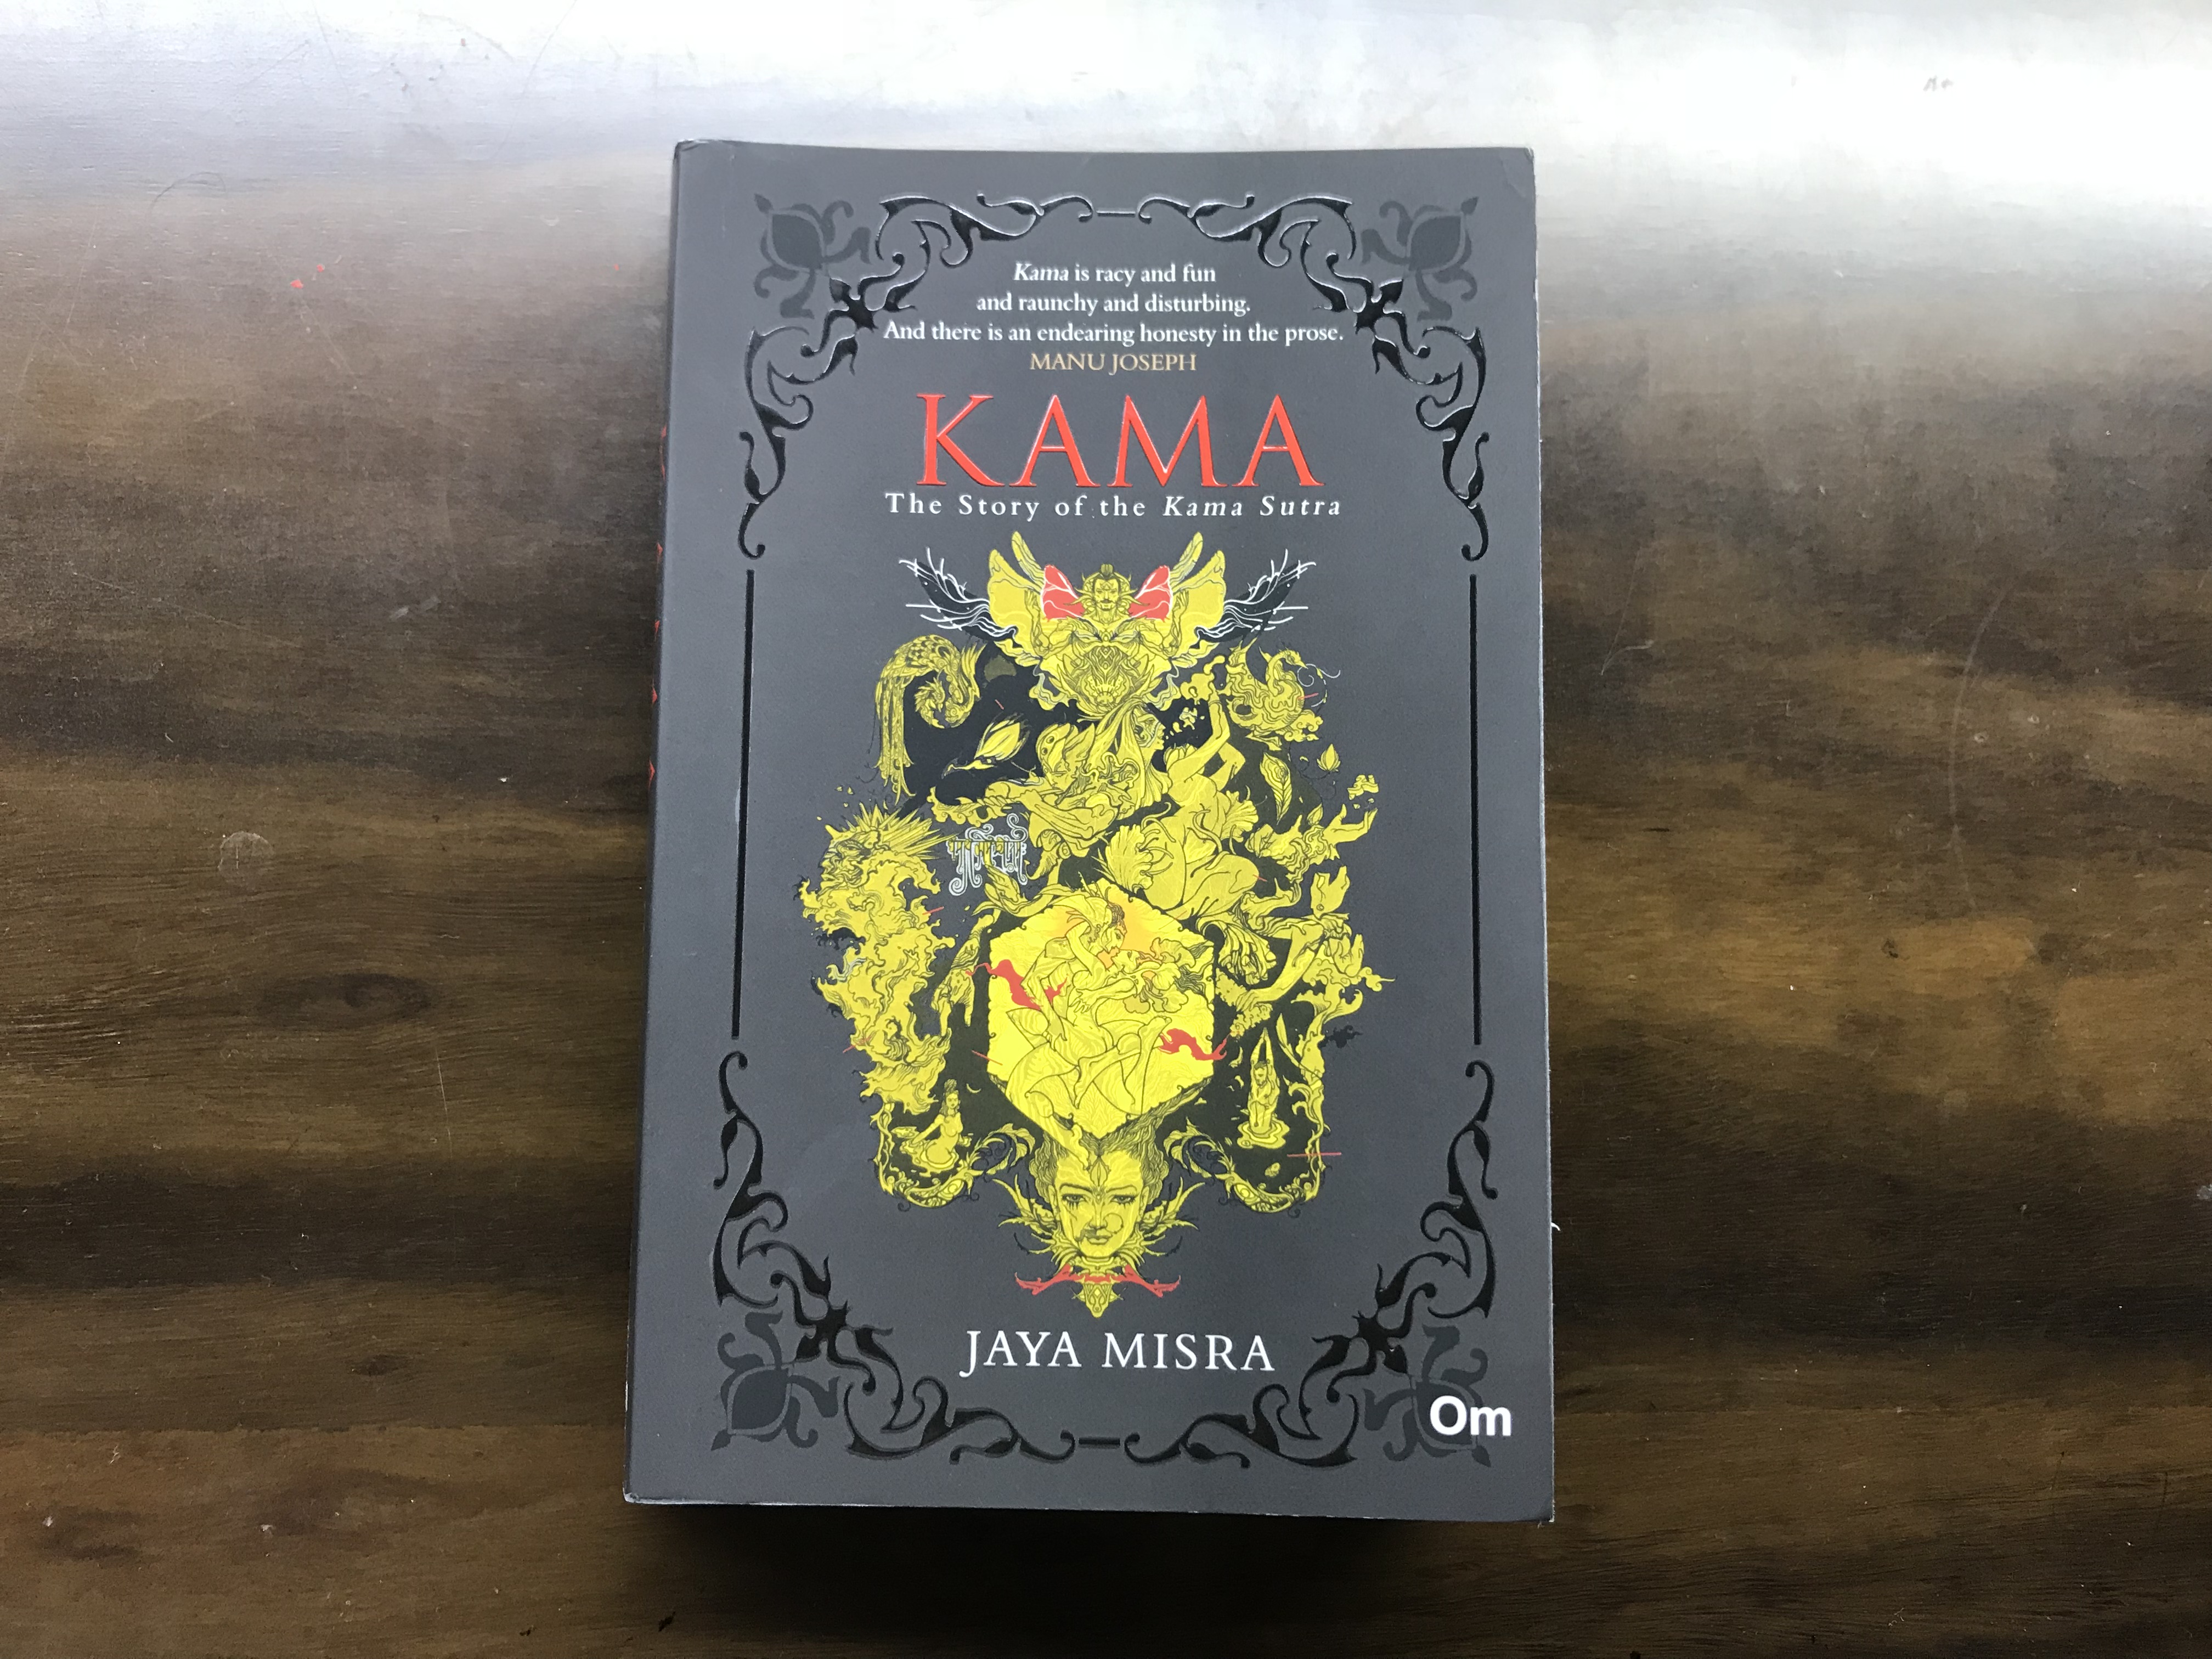 You are currently viewing Kama – the story of the Kama Sutra by Jaya Misra